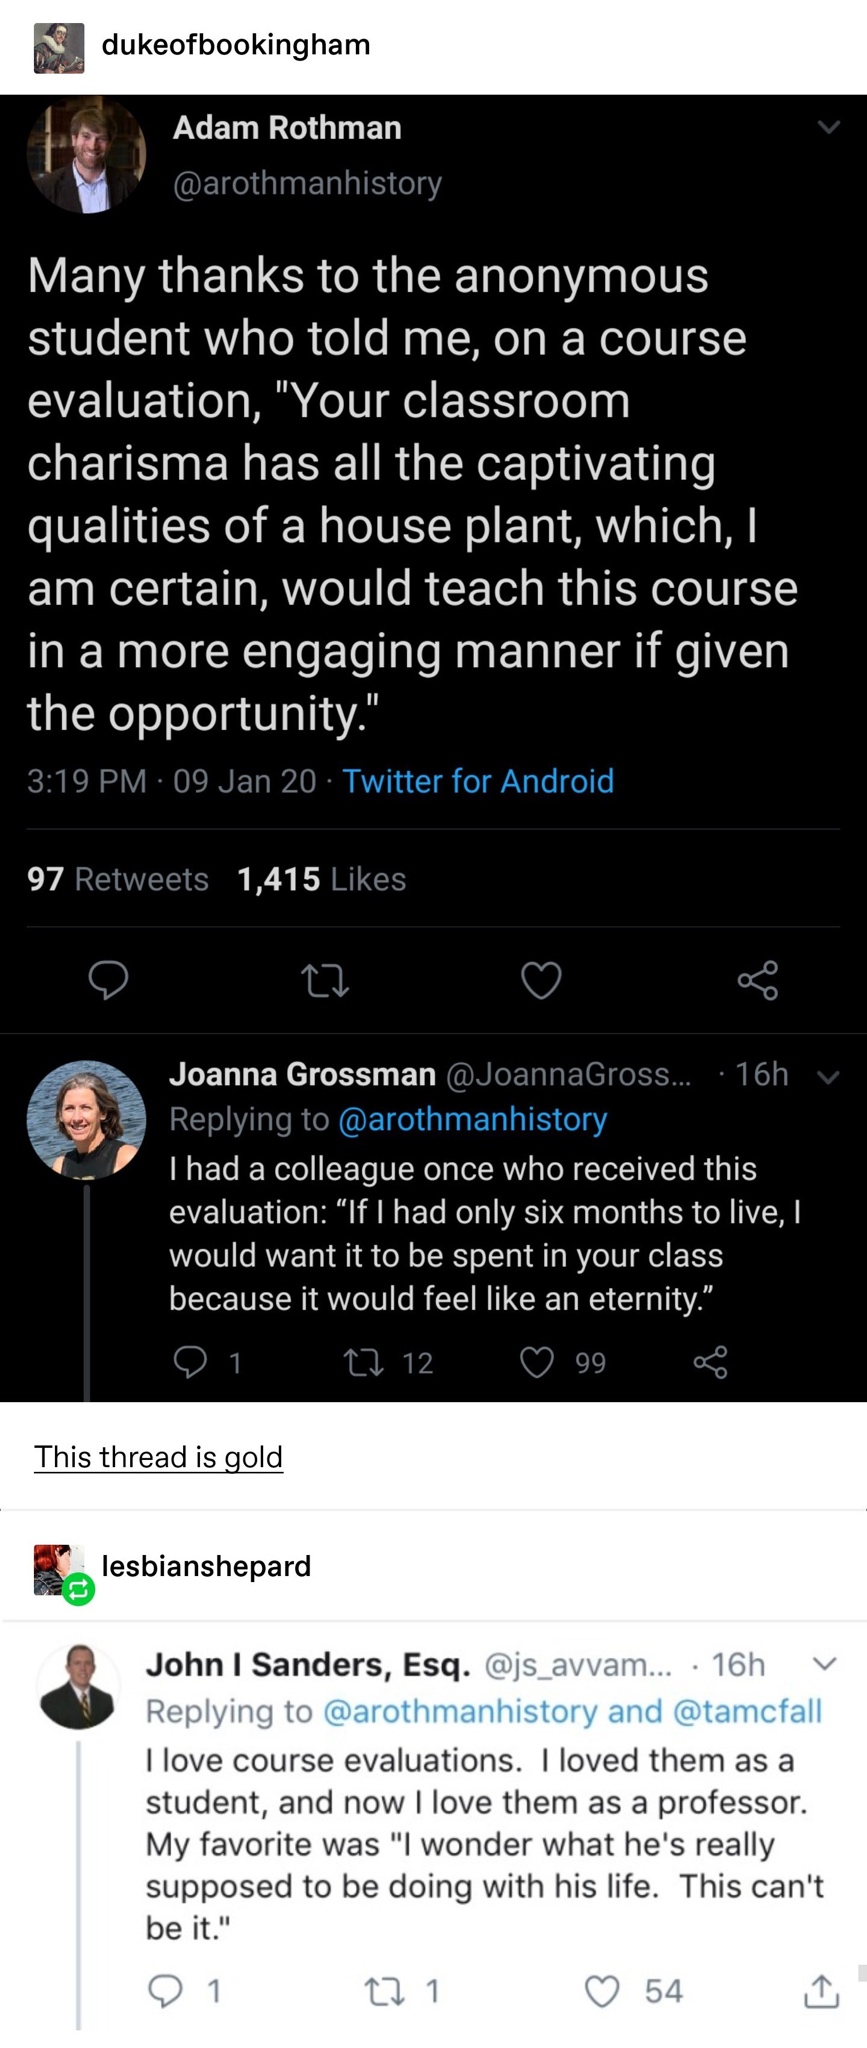 screenshot - dukeofbookingham Adam Rothman Many thanks to the anonymous student who told me, on a course evaluation, "Your classroom charisma has all the captivating qualities of a house plant, which, I am certain, would teach this course in a more engagi